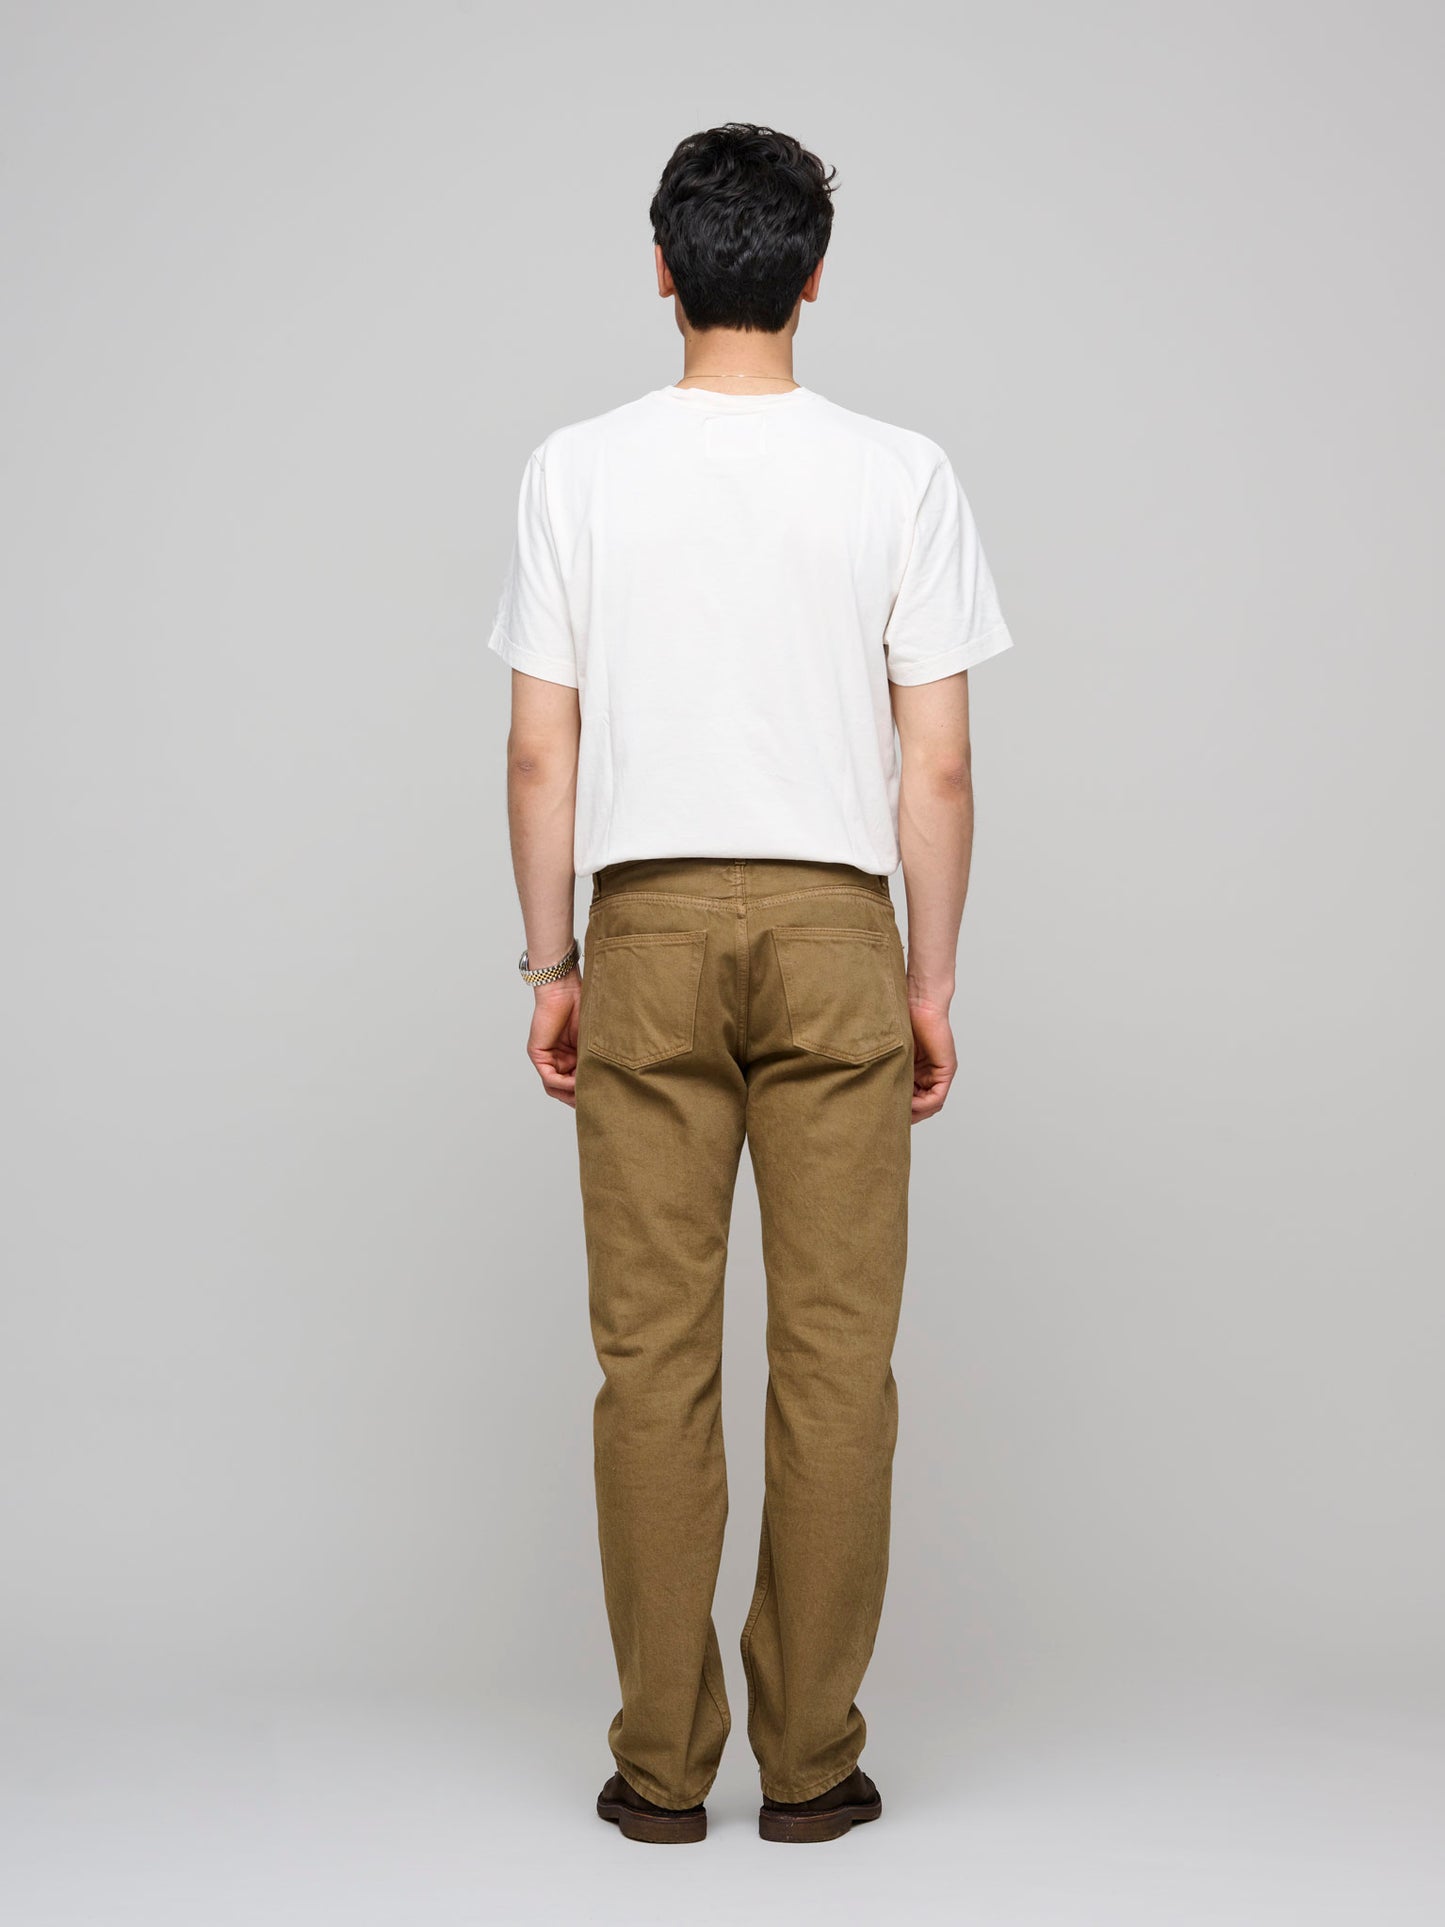 Standard Jeans, Dyed Brown